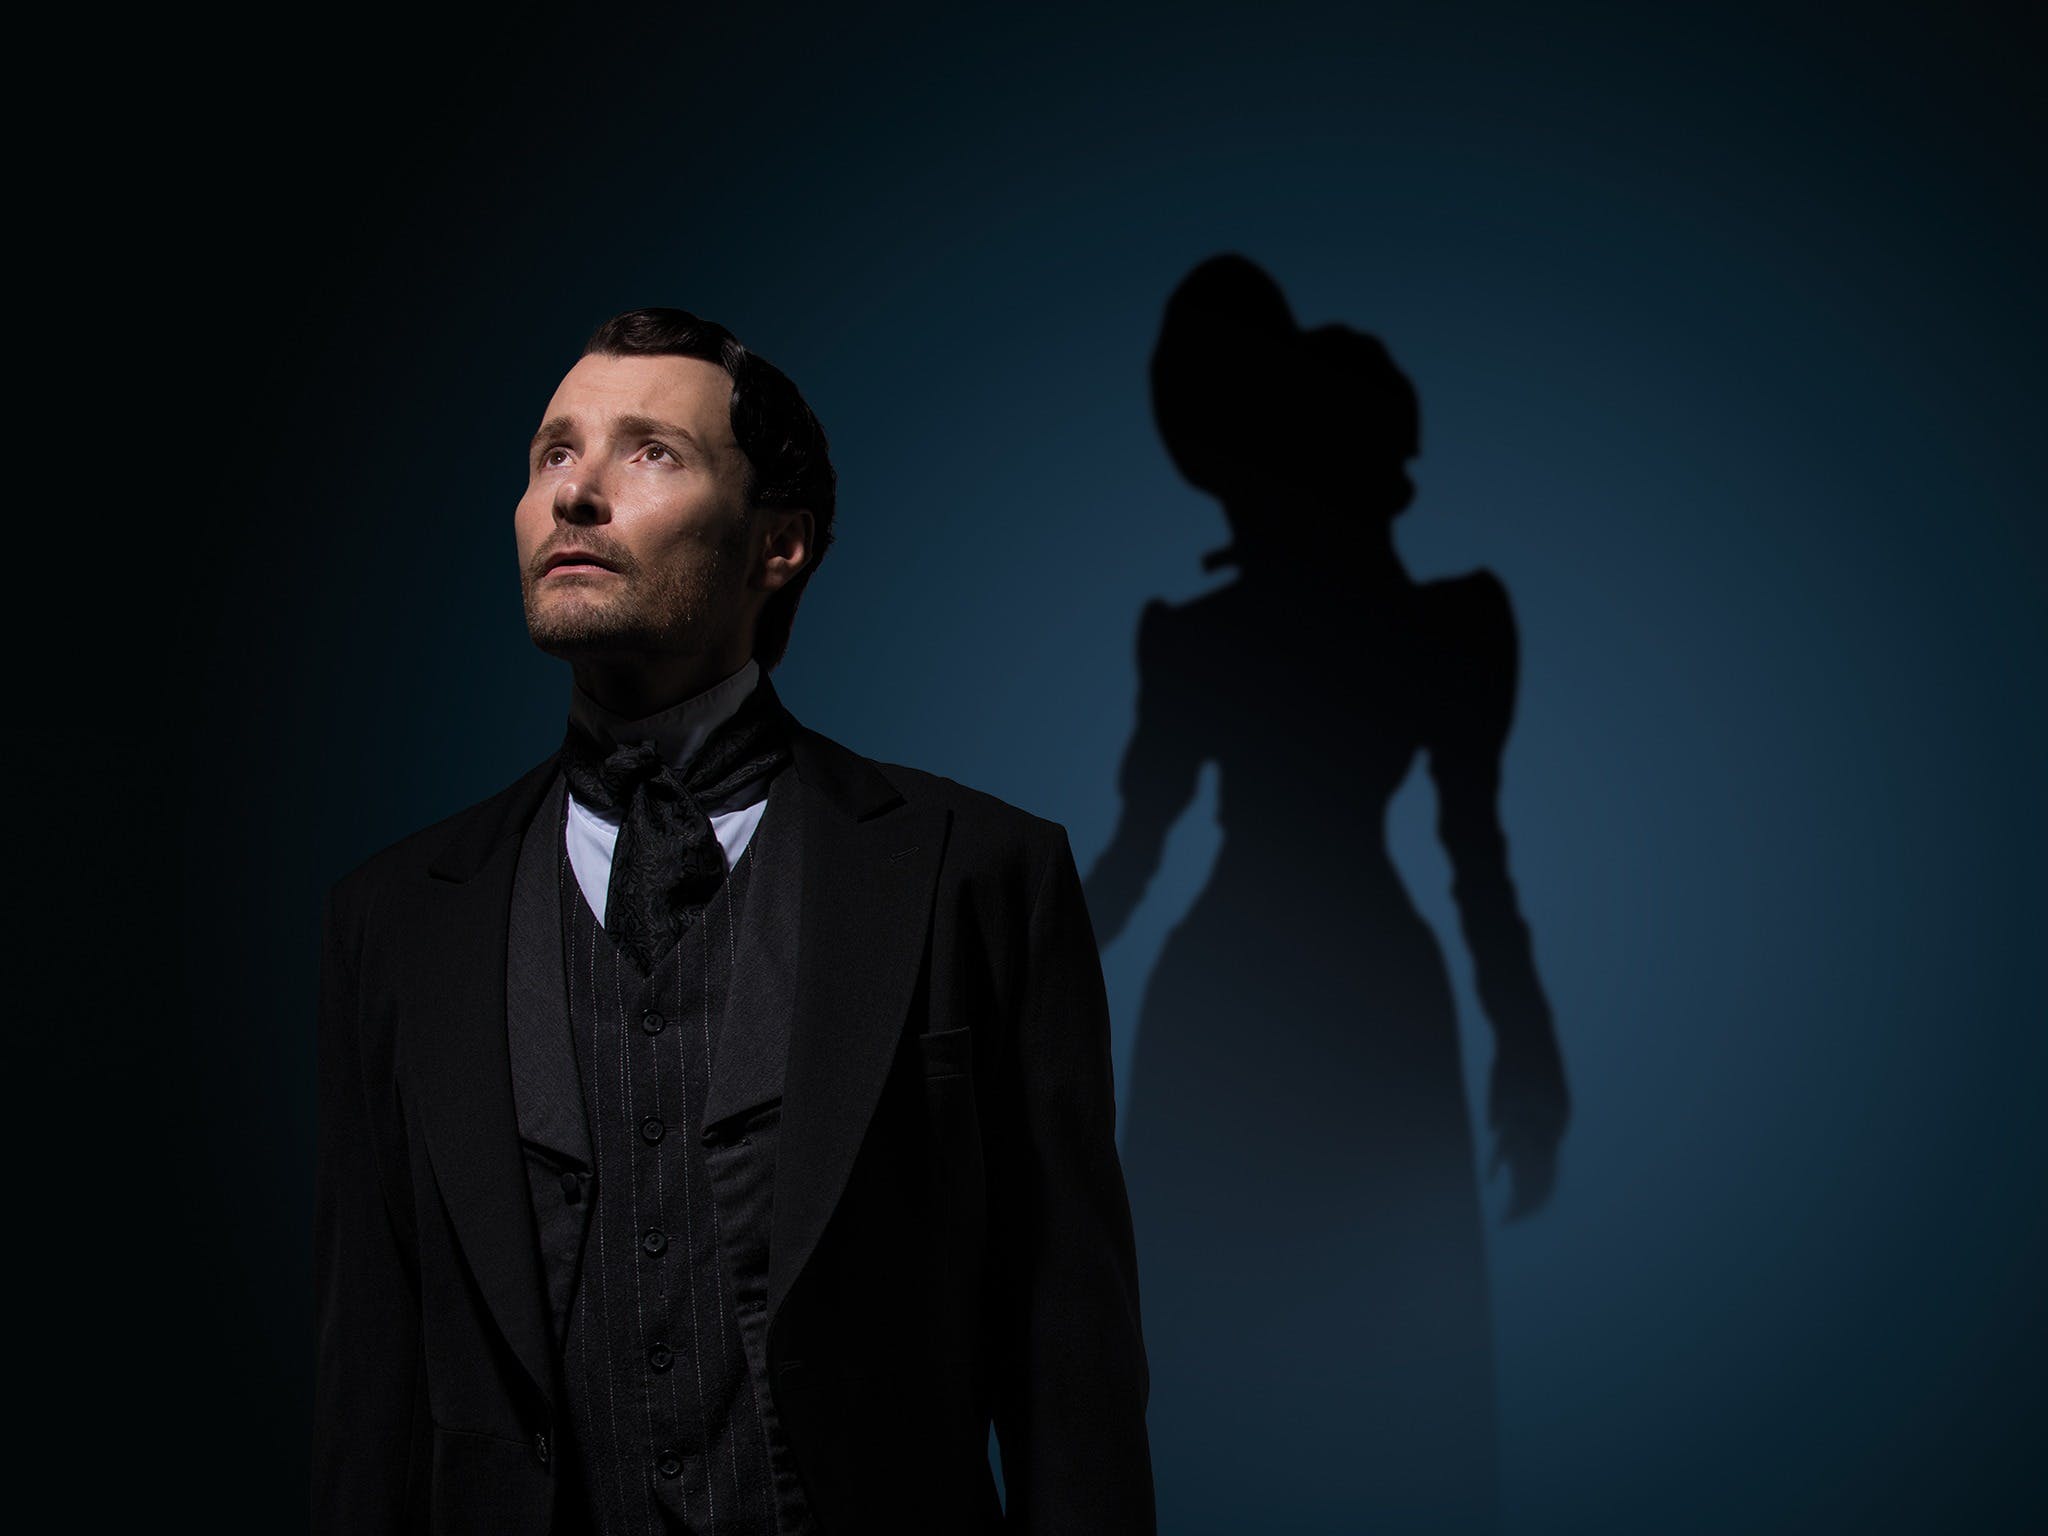 The Woman in Black by Susan Hill and Stephen Mallatrat - Tourism Canberra